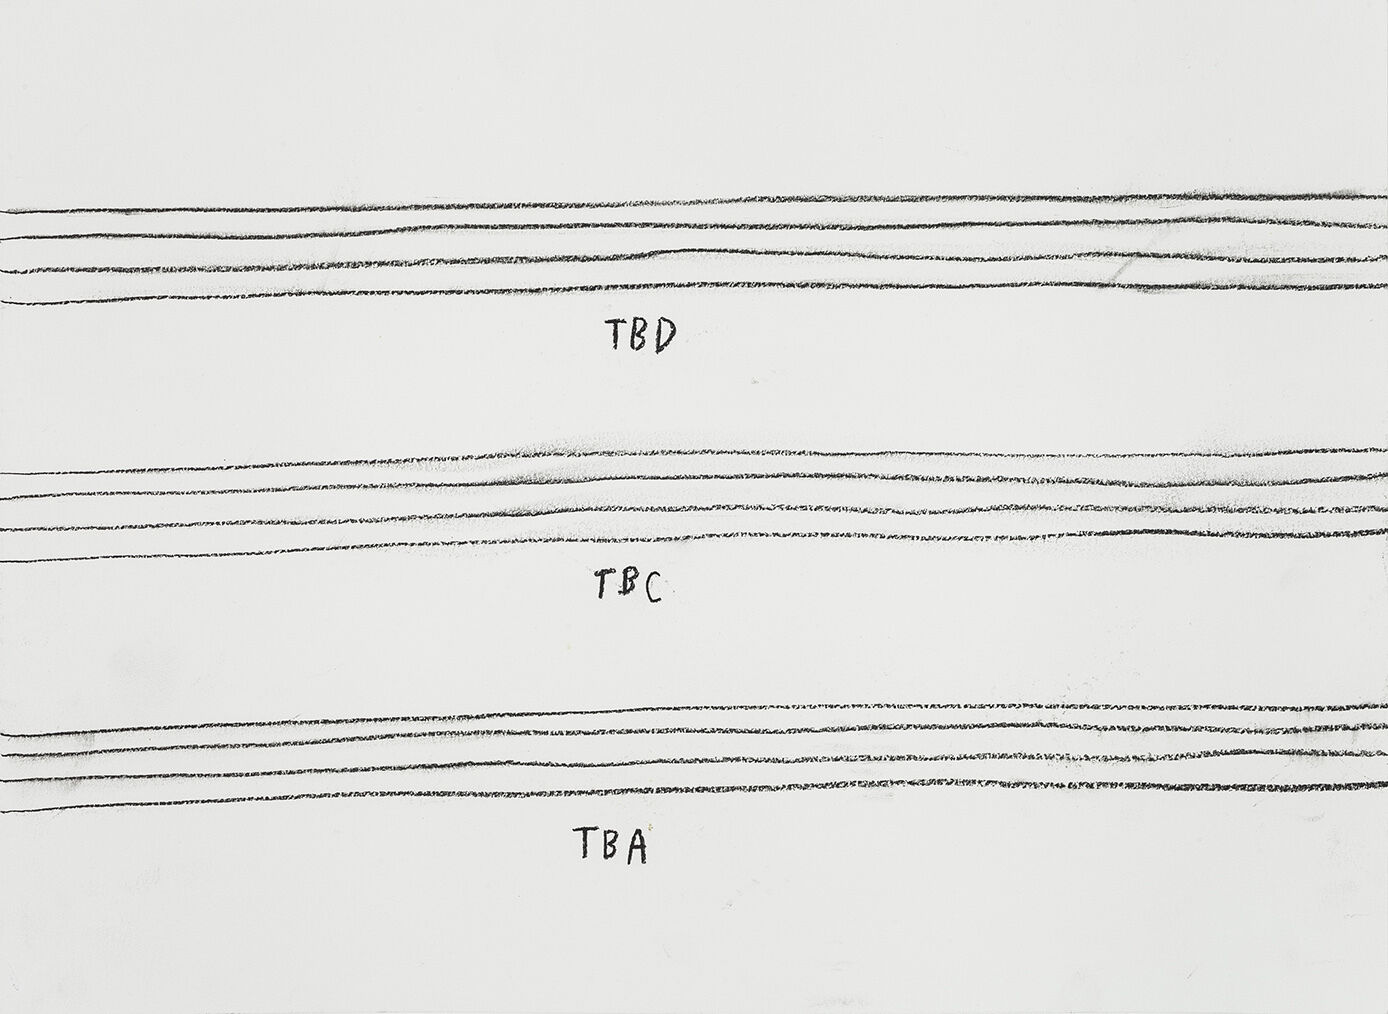 Three sets of parallel black lines on a white background, labeled "TBD," "TBC," and "TBA" from top to bottom.